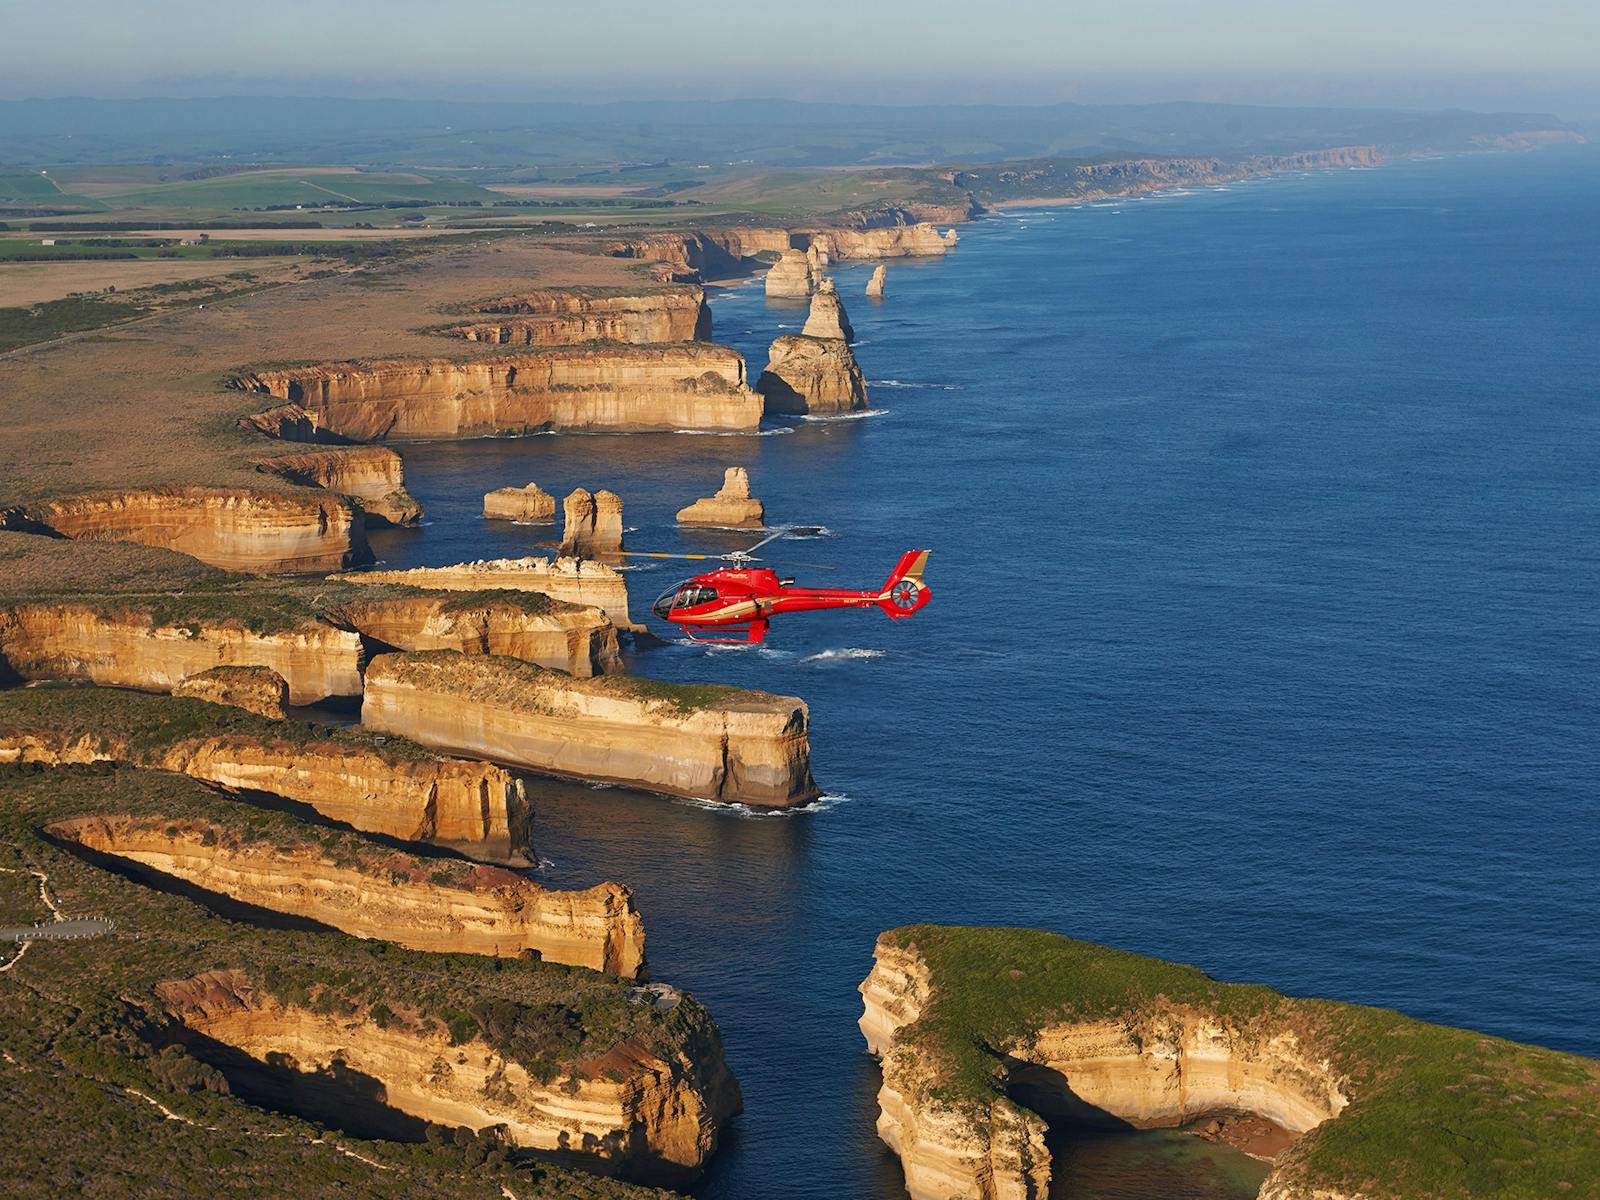 Helicopter over 12 Apostles